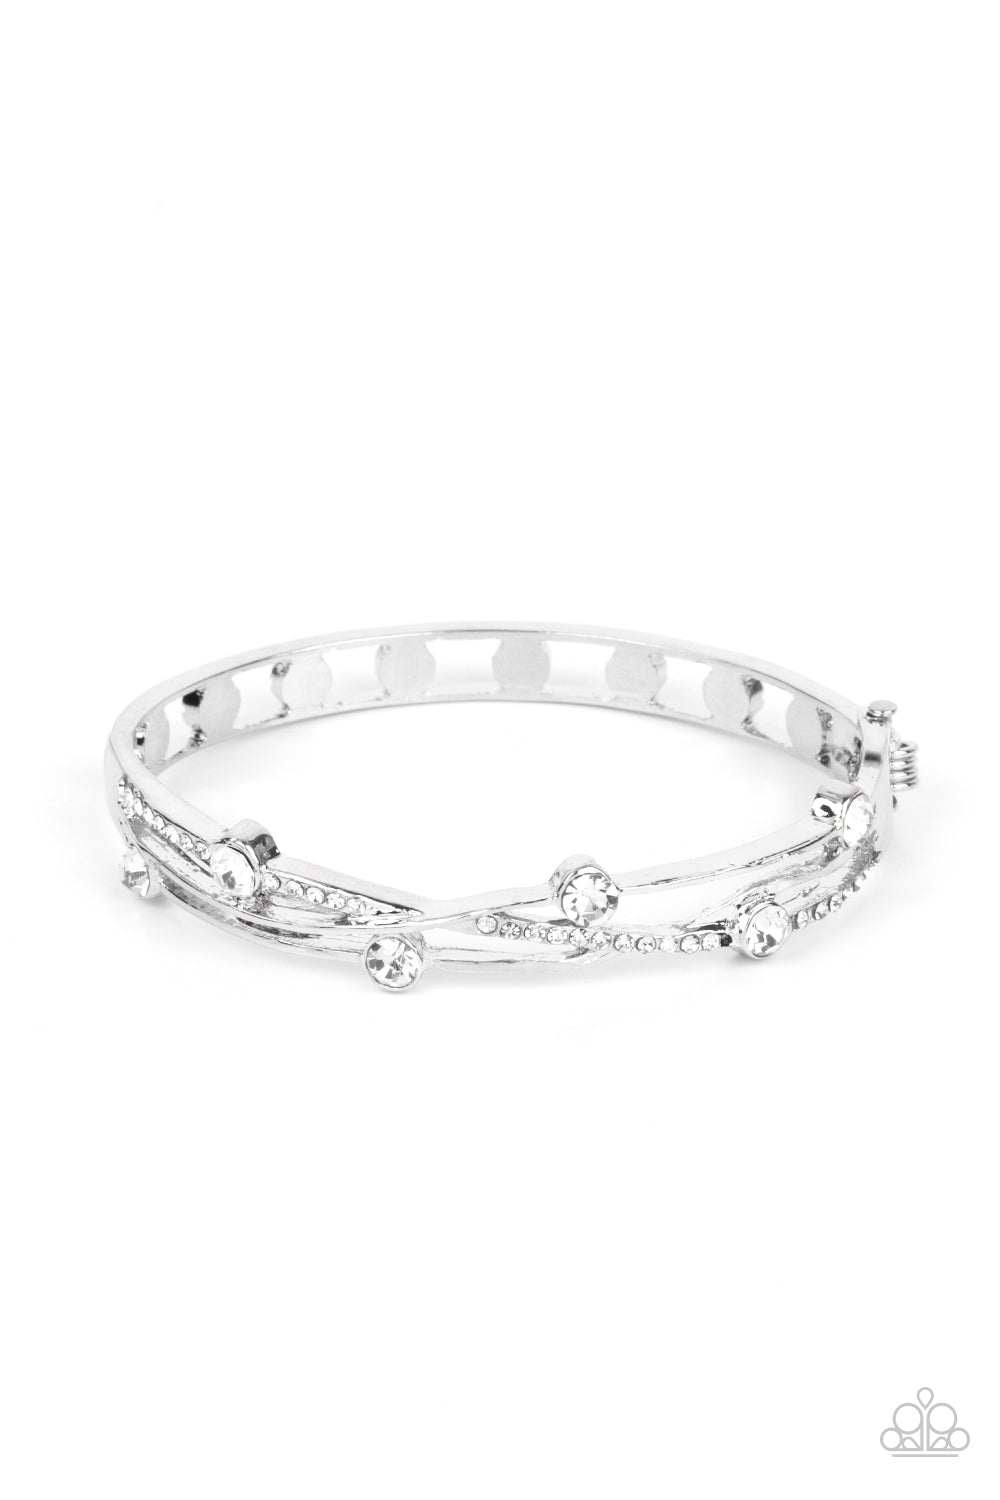 Slammin Sparkle - White and Silver Bracelet - Paparazzi Accessories - Dotted with glittery white rhinestones, smooth silver and white rhinestone dotted ribbons delicately intertwine into a decorative bangle-like bracelet around the wrist. Features a hinged closure.